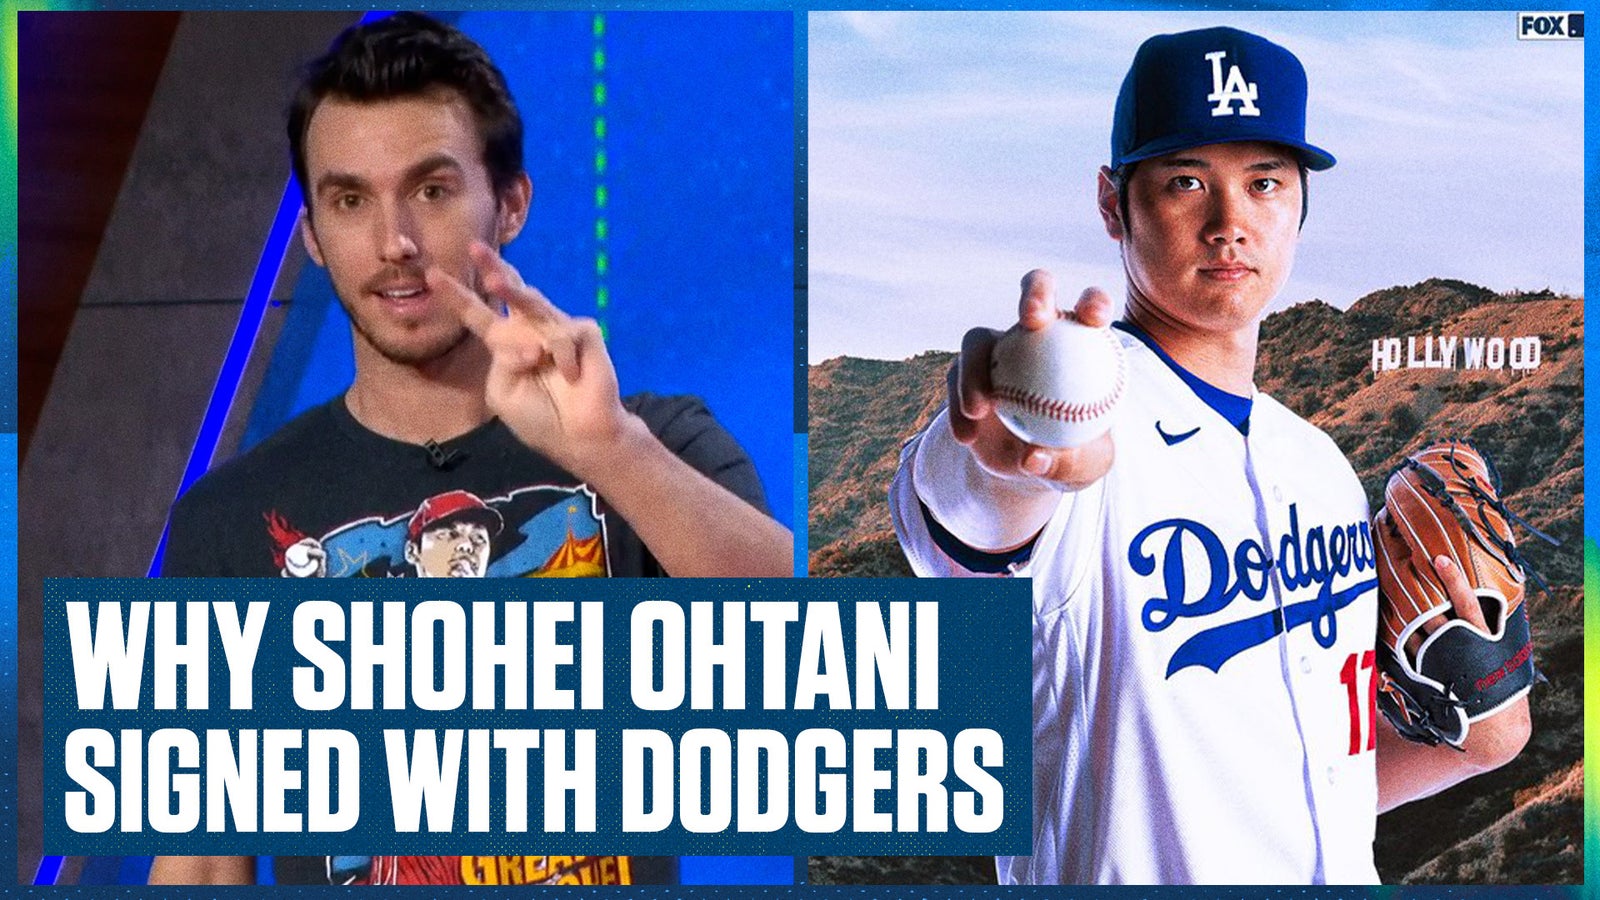 Why did Shohei Ohtani sign with Dodgers? Ben Verlander weighs in